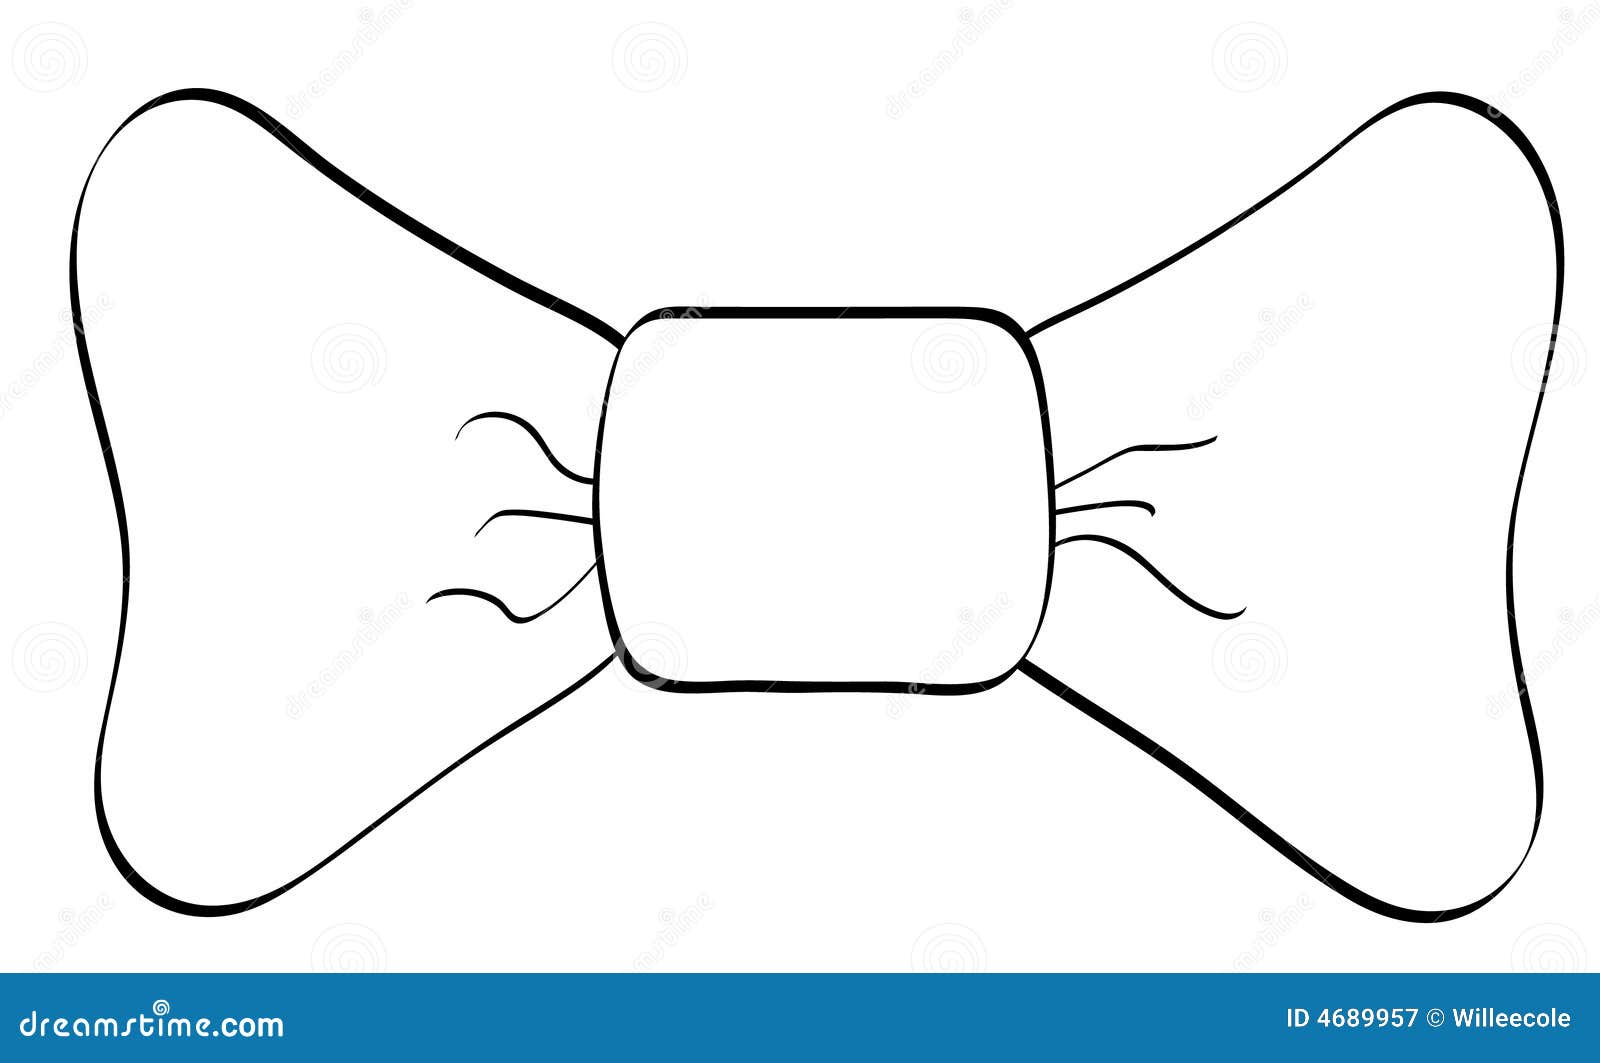 clipart bow tie outline - photo #11